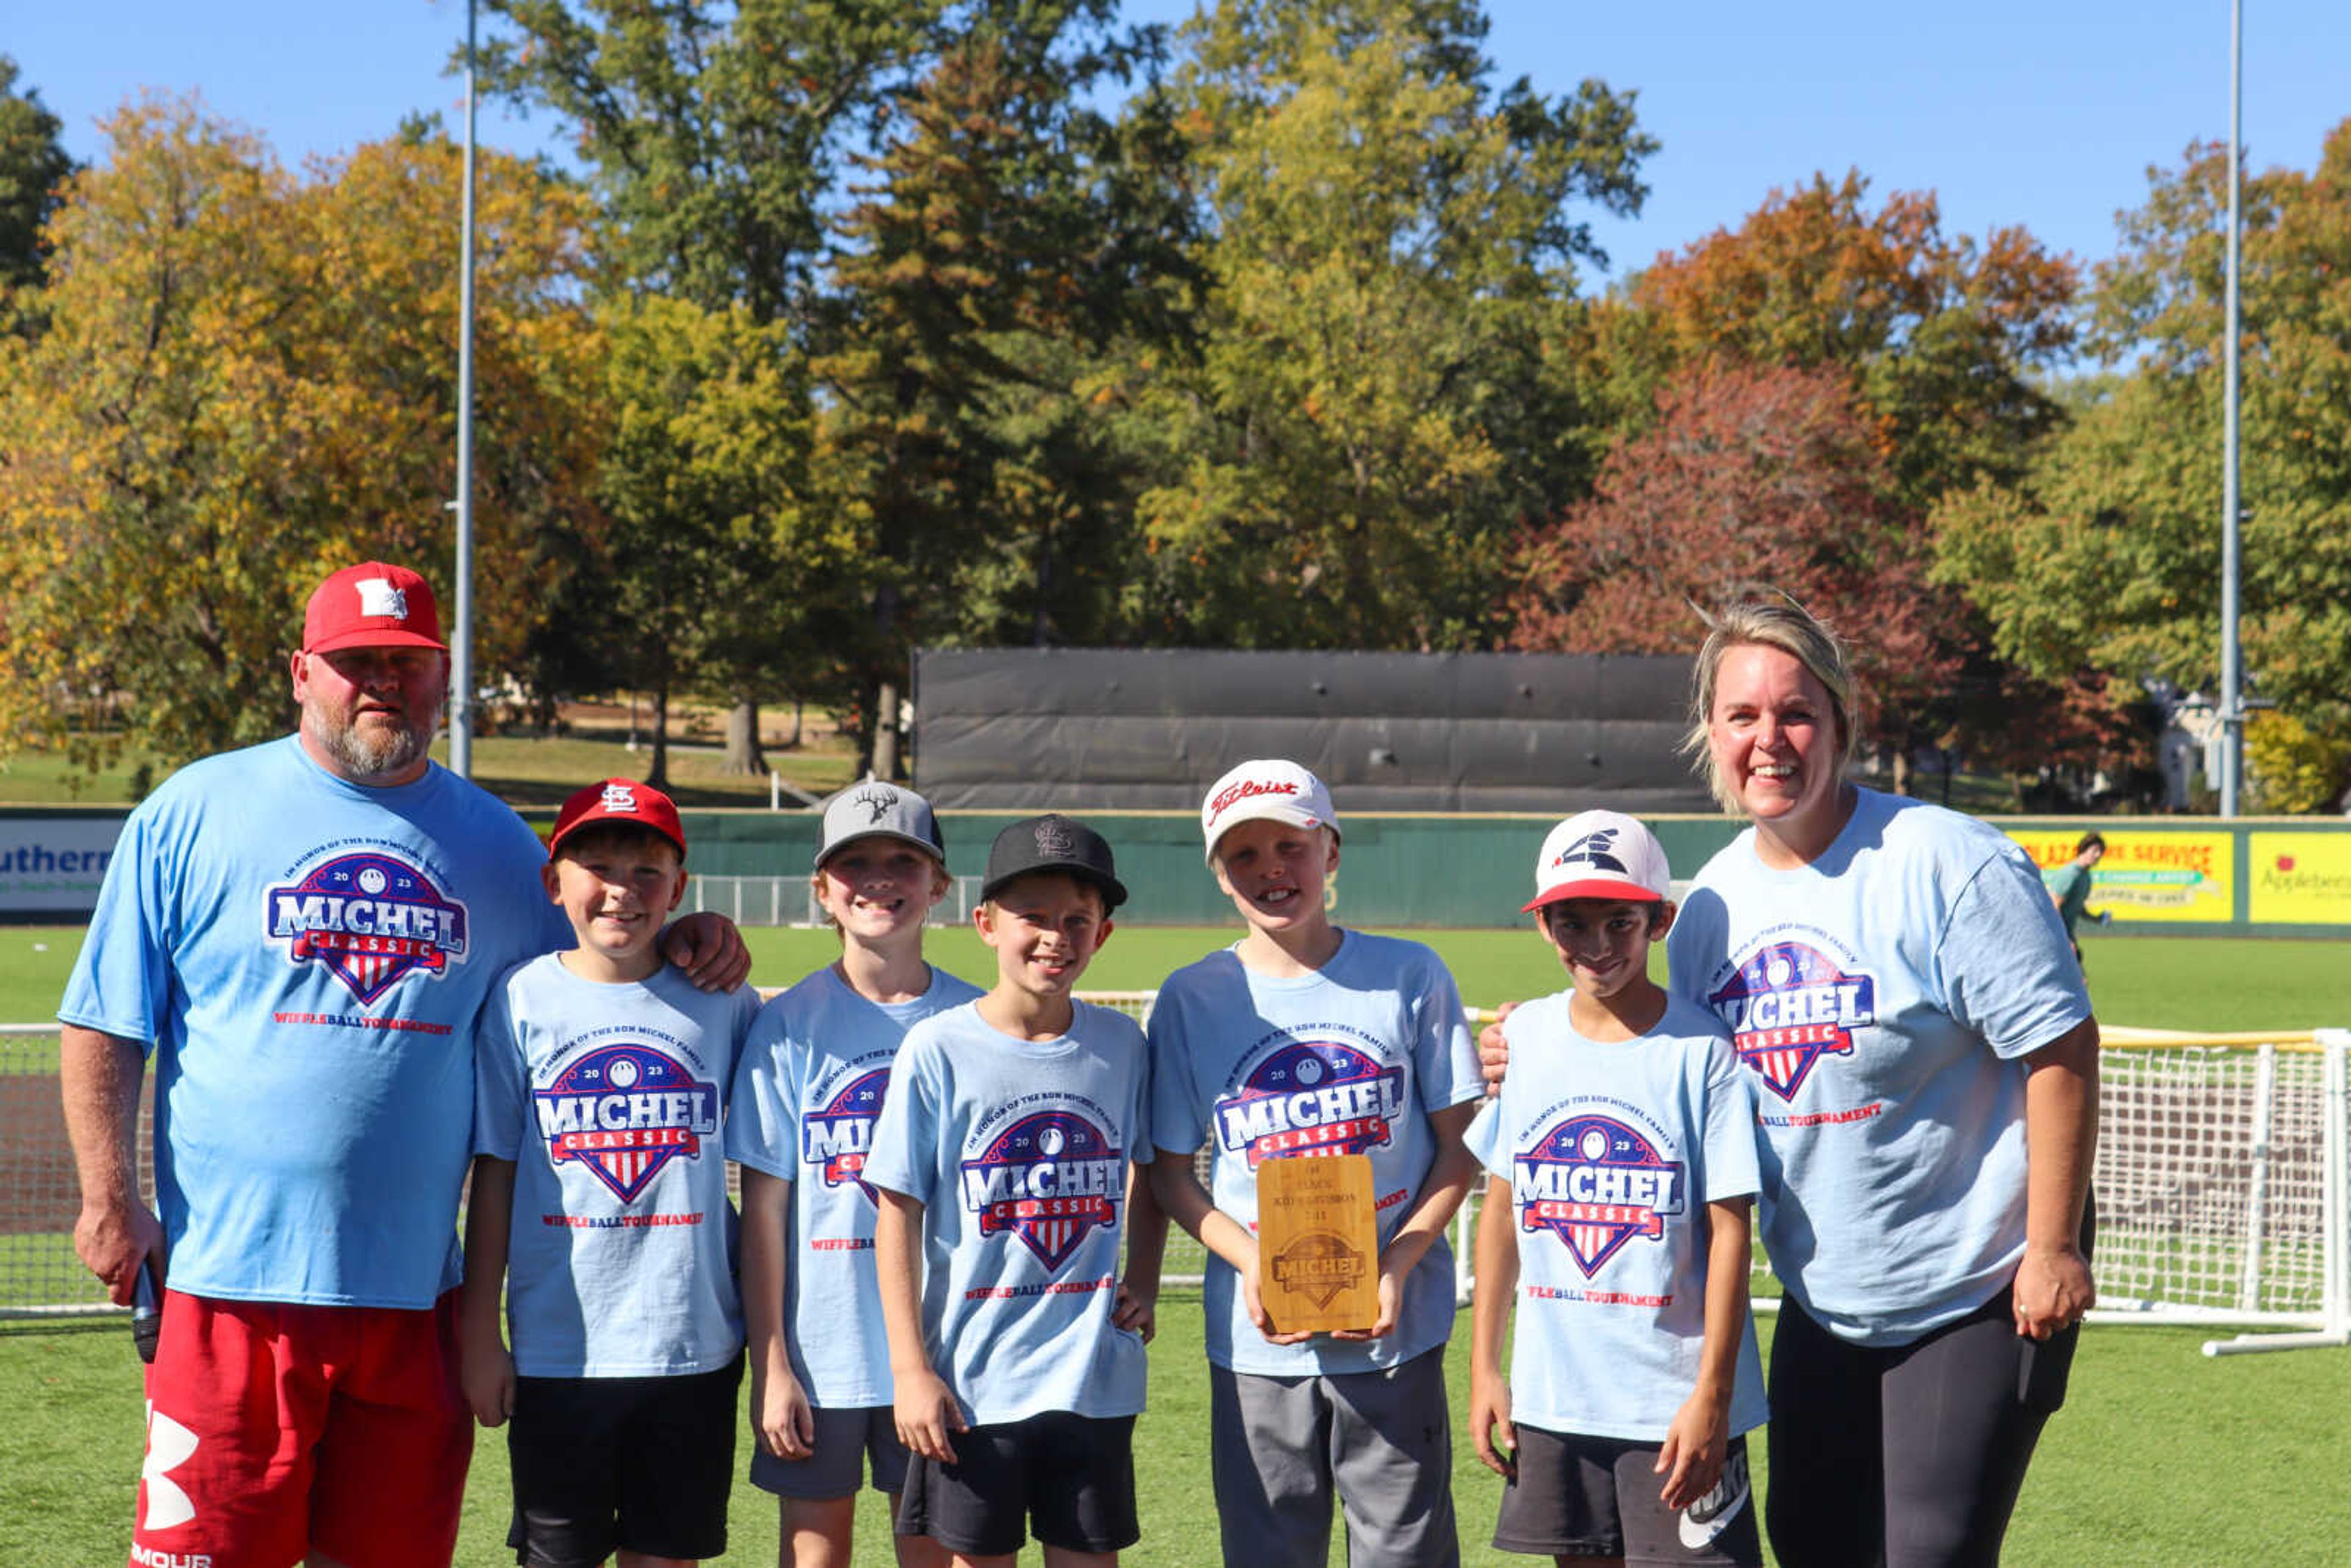 Members of the 1st place team in the 7-11 age division pose with the founders of the Michel Classic and their 1st place plaque after their victory in the championship game. The Michel Classic is a wiffleball tournament with 3 age divisions playing during different portions of the day across multiple miniature fields set up on Capaha Field.